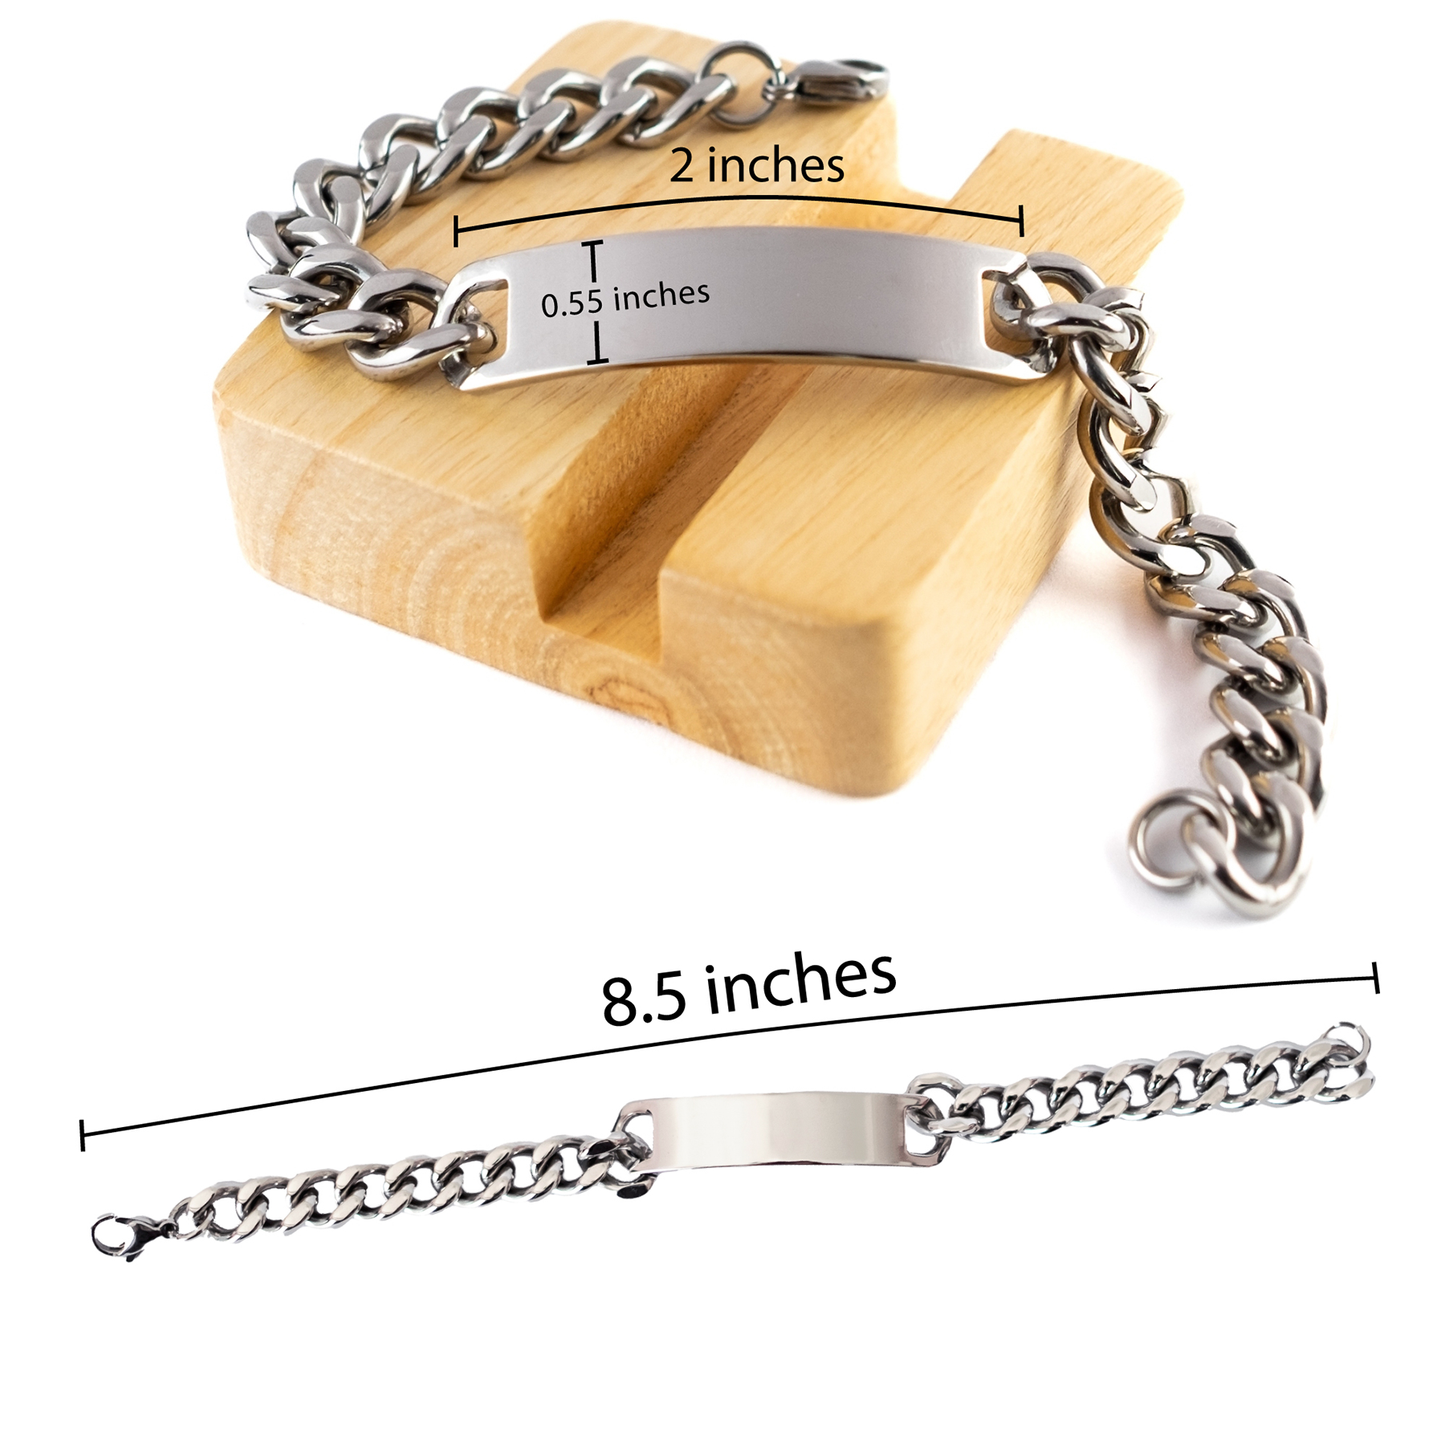 Godmom Engraved Cuban Chain Stainless Steel Bracelet - Perfect Gift for Birthdays, Holidays, and Special Occasions - You will always have a special place in my heart - Inspirational and Meaningful Jewelry for Godmom